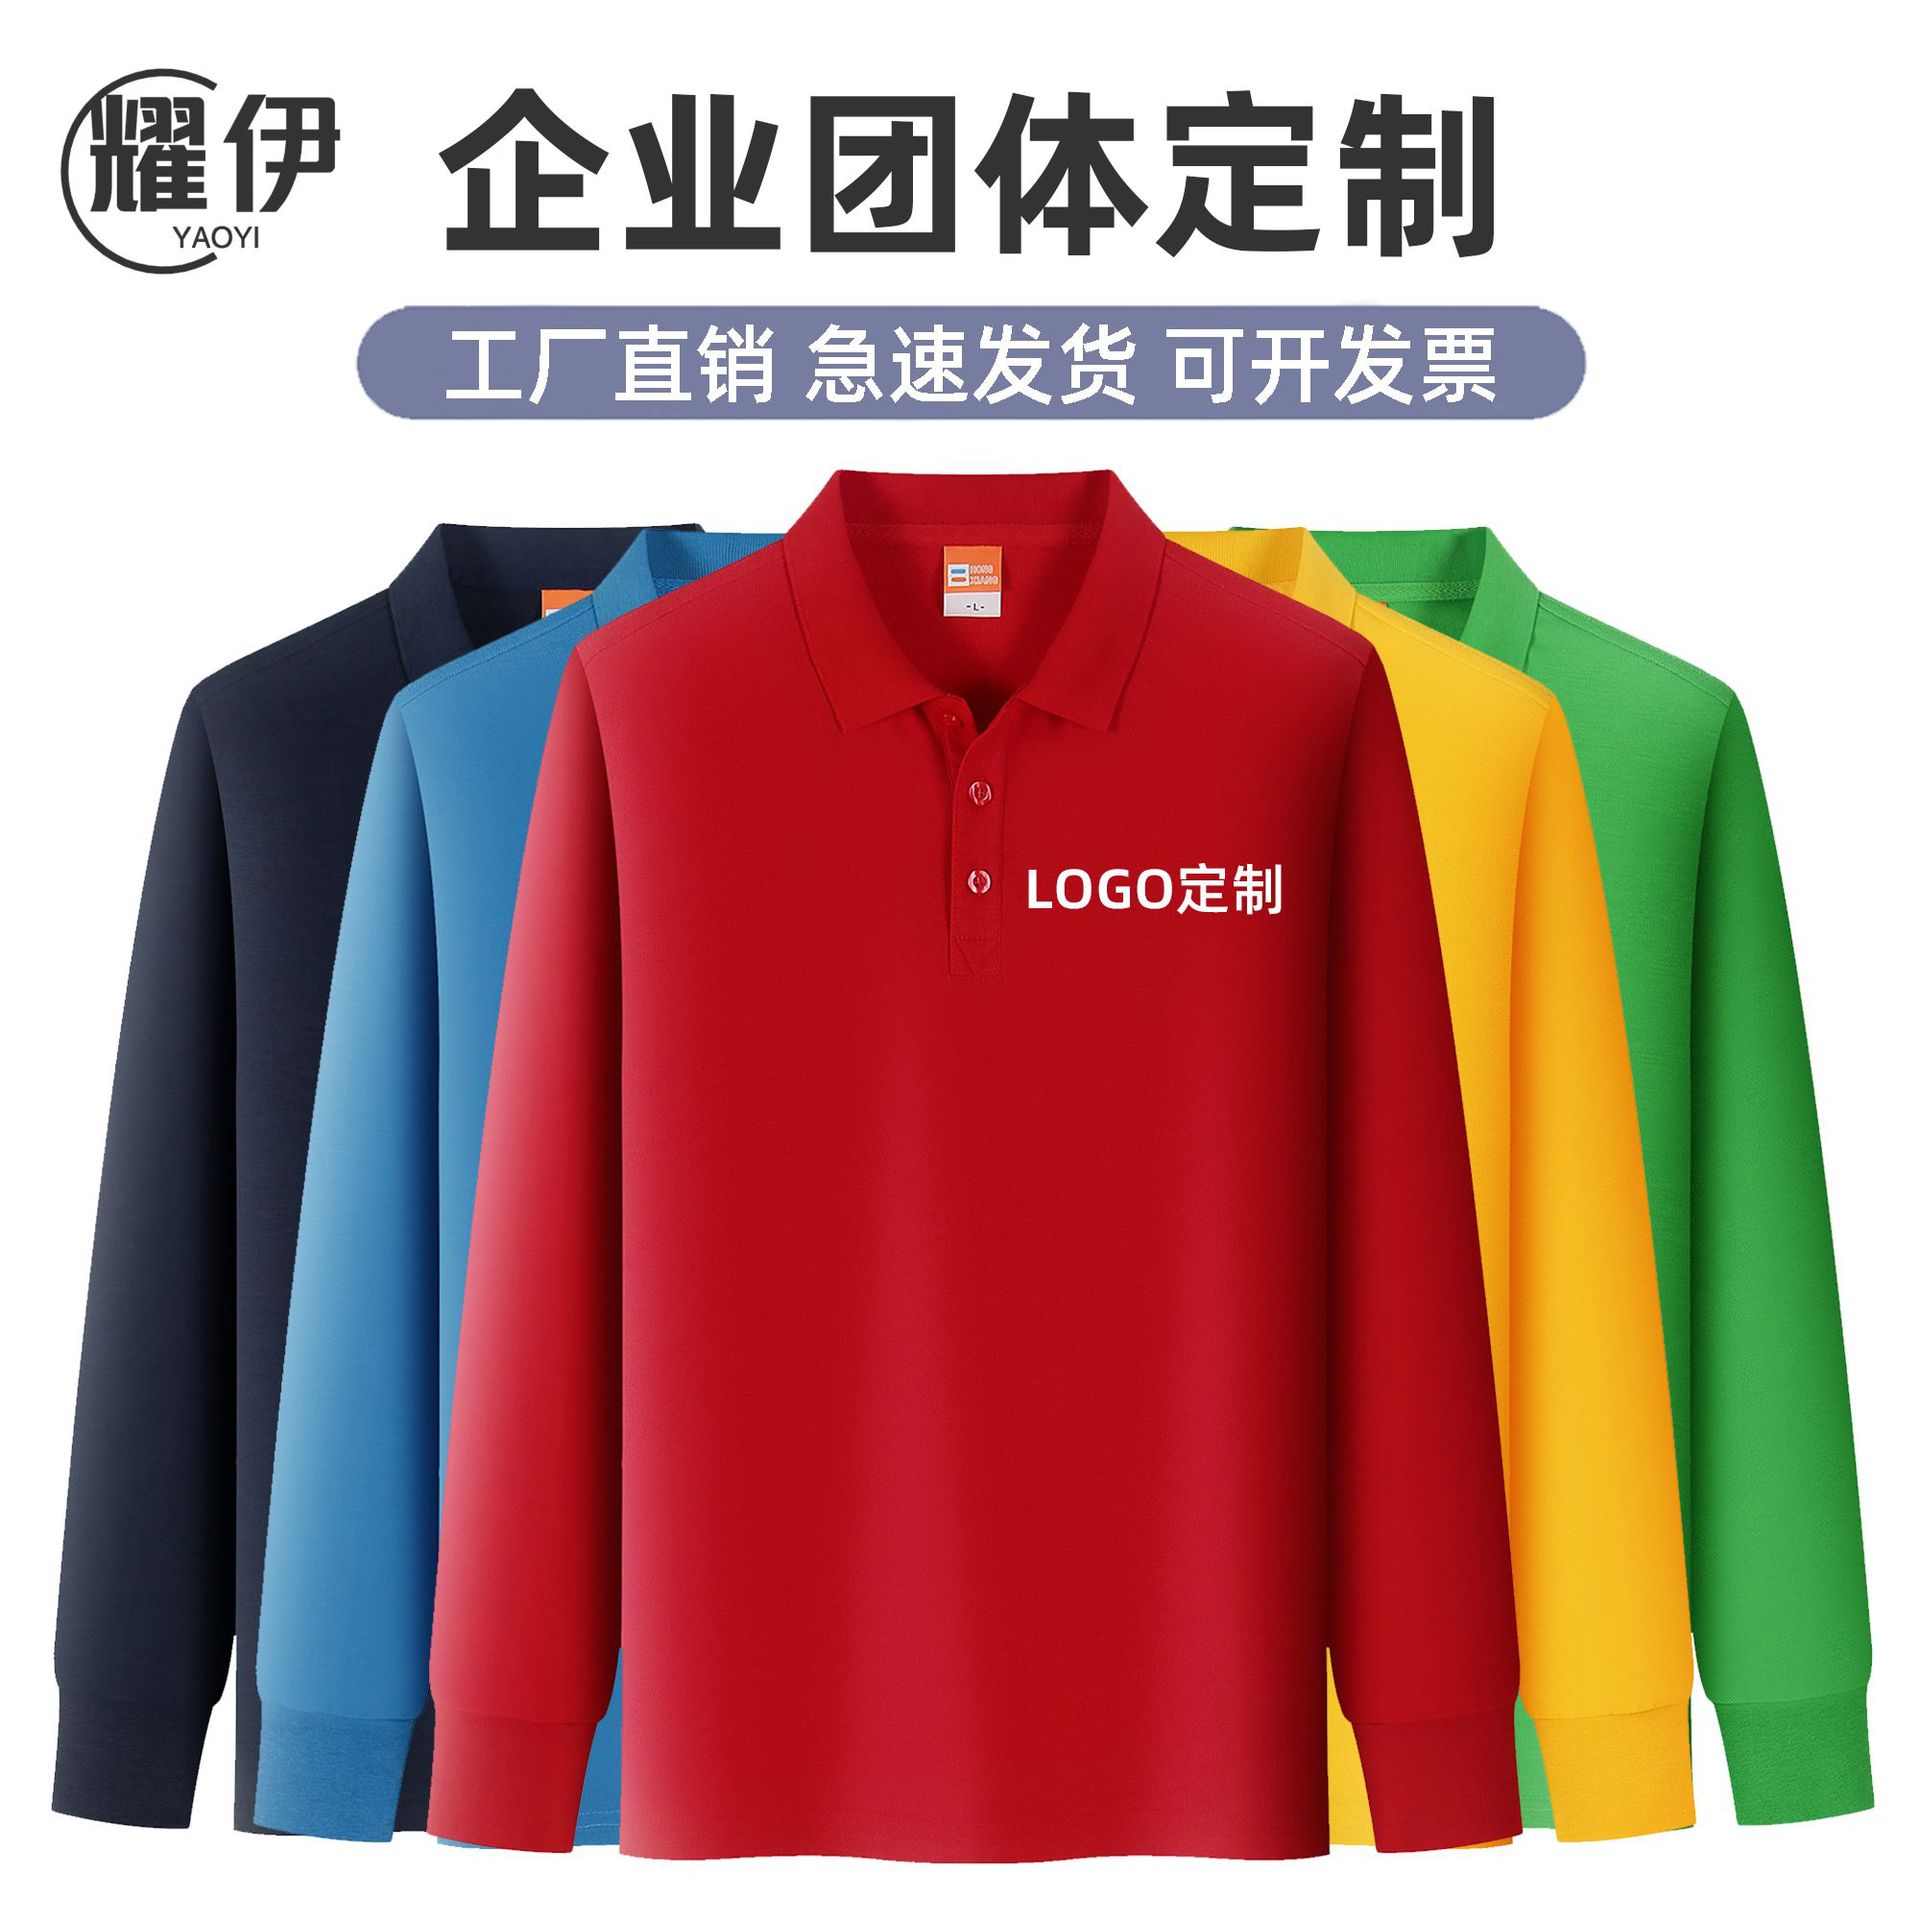 Polo Shirt Custom Printed Logo Spring and Autumn Lapel Long-Sleeve Working Clothes Group Activity Culture Advertising Shirt T-shirt Embroidery